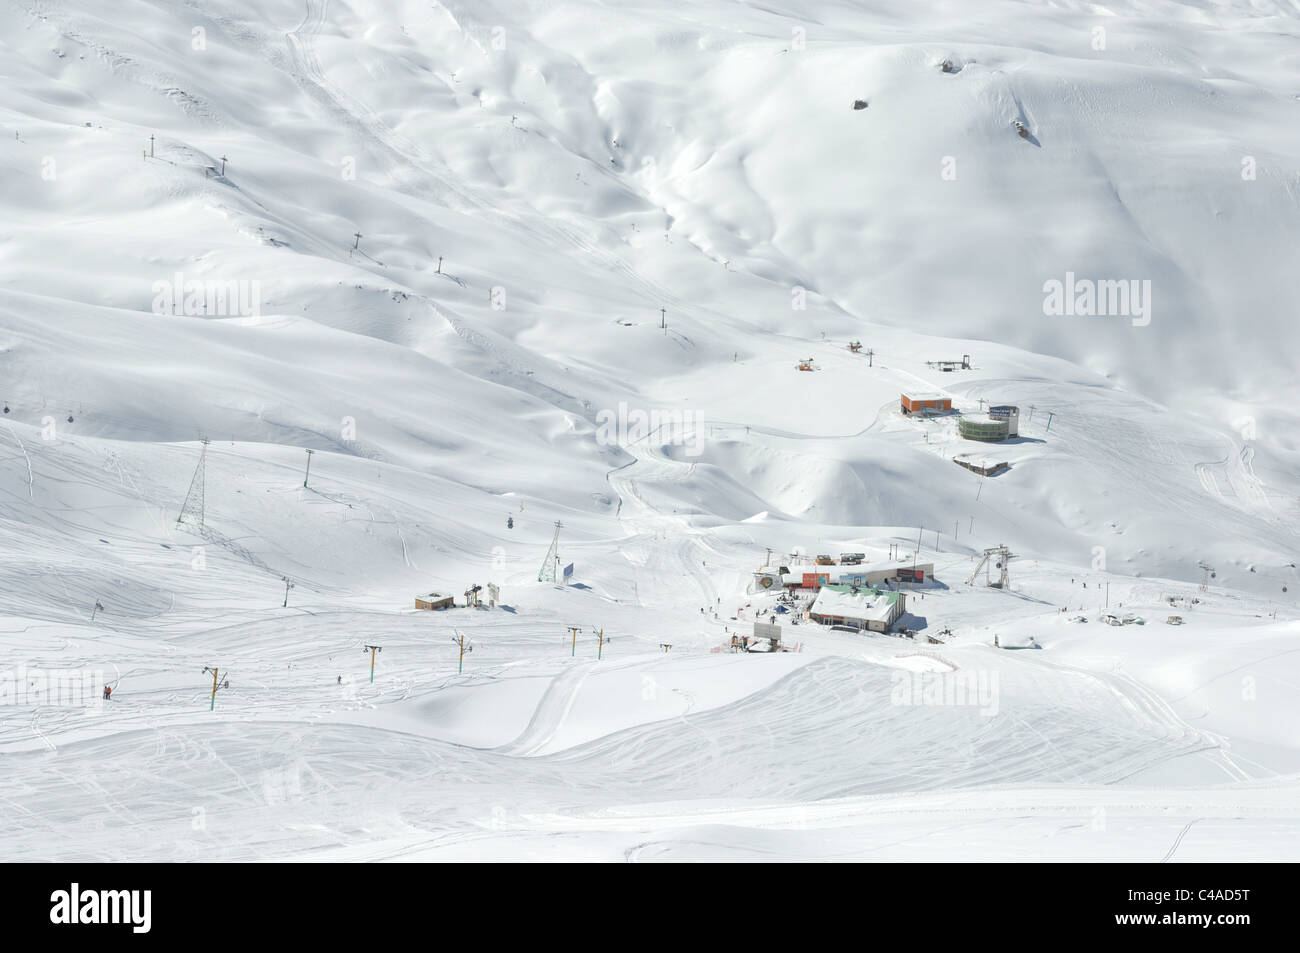 Dizin ski resort in the Alborz mountains of Iran under a blue sky and snowfall Stock Photo